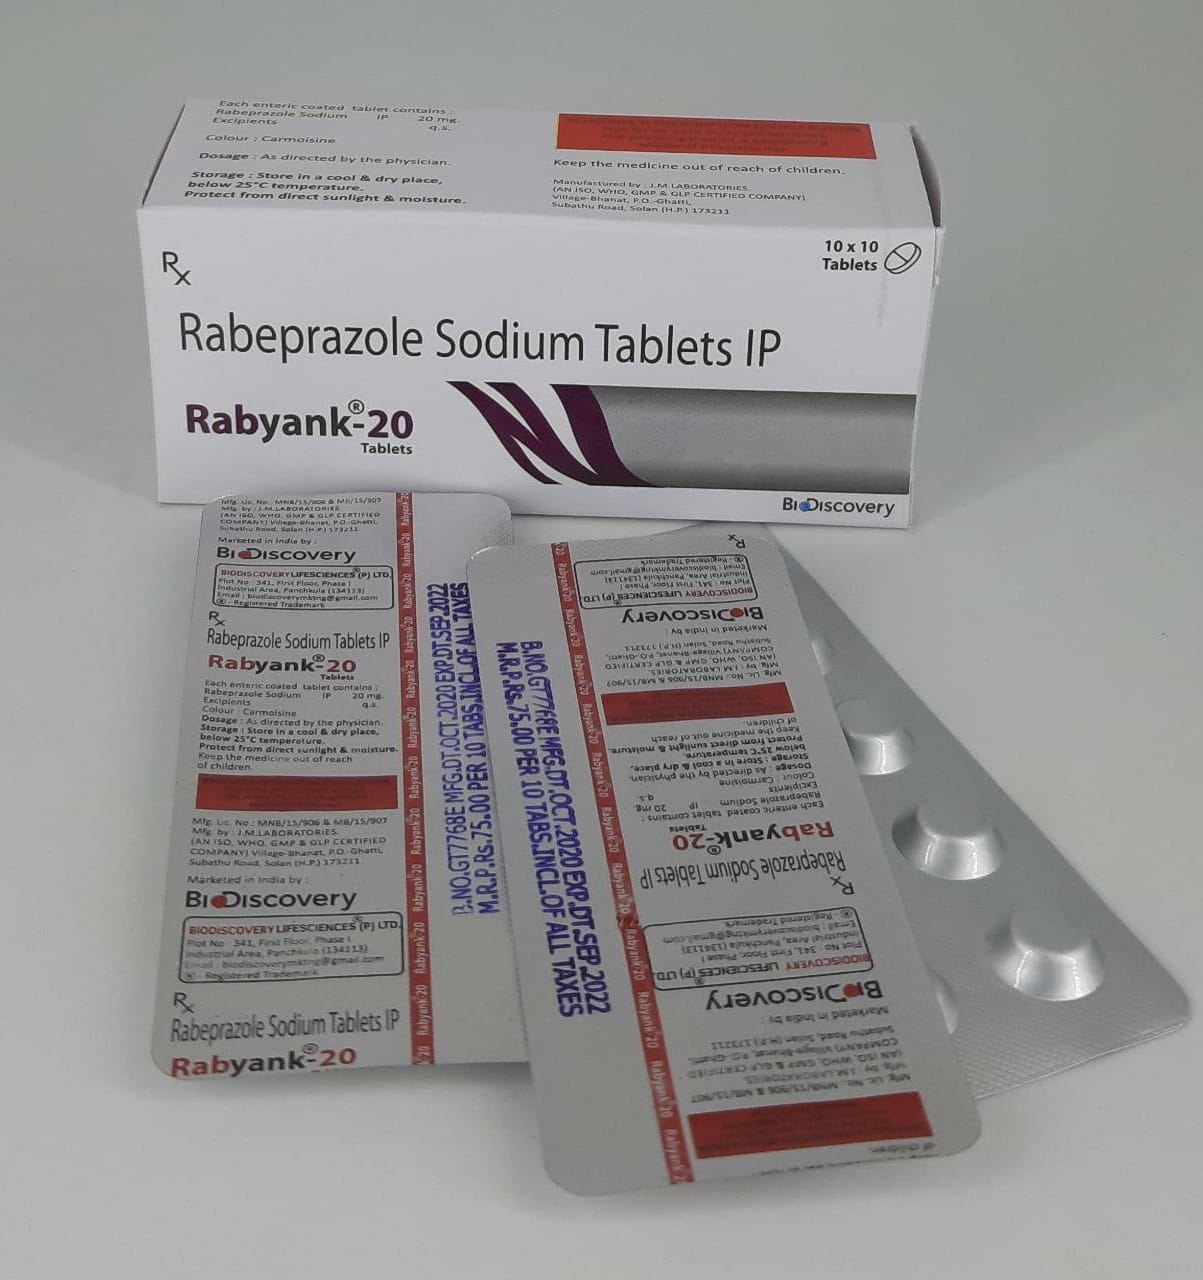 Product Name: Rabyank 20, Compositions of Rabyank 20 are Rabeprazole Sodium Tablets IP - Biodiscovery Lifesciences Pvt Ltd